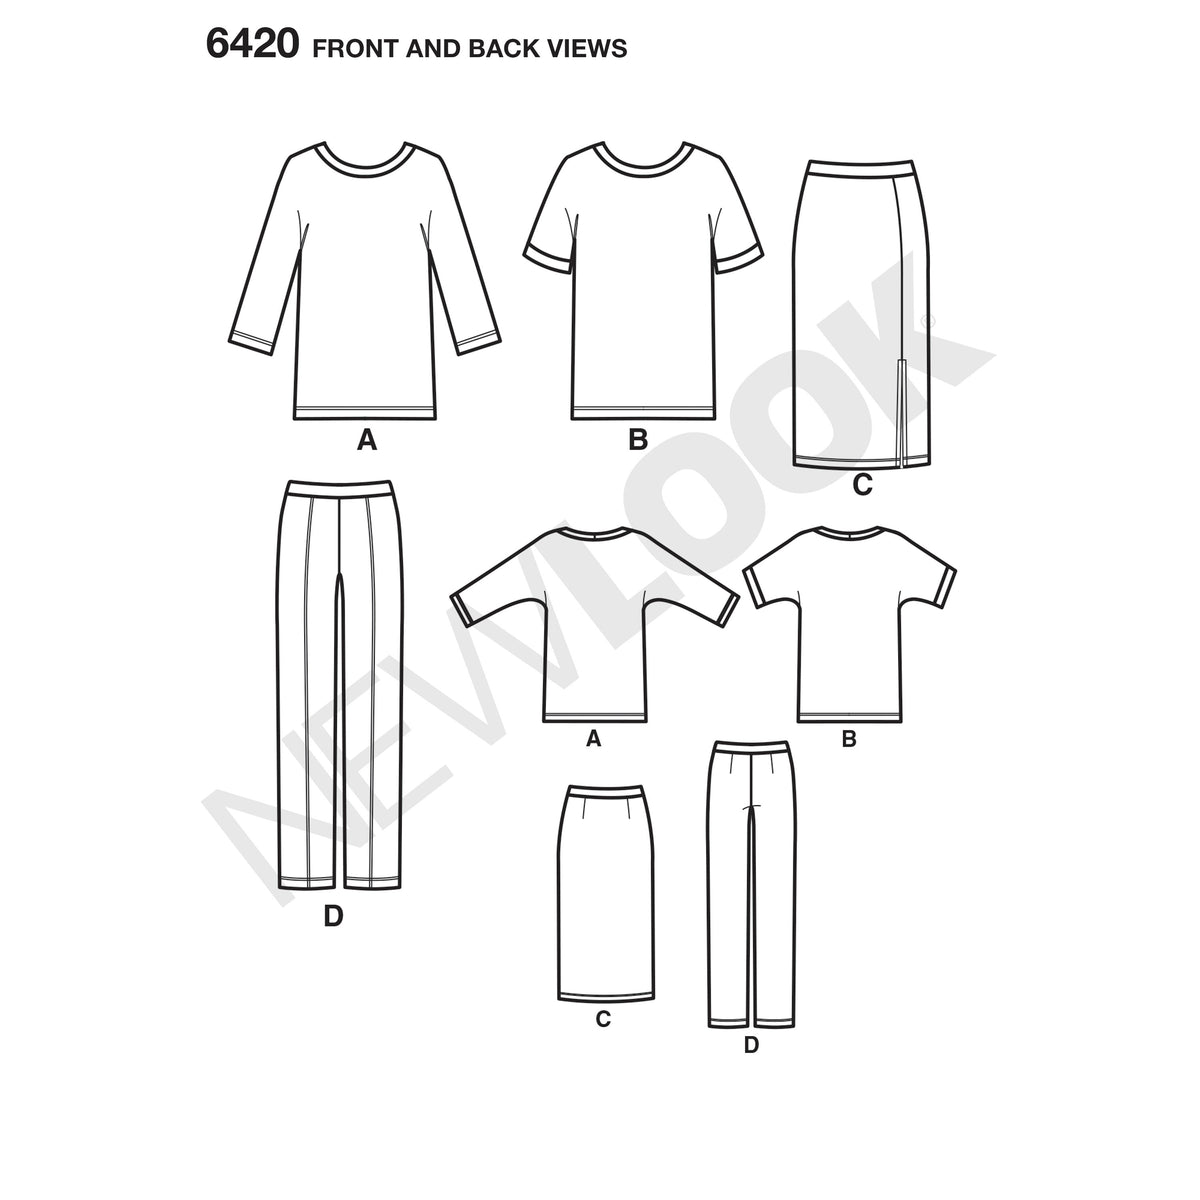 6420 Misses' Knit Skirt, Pants and Top